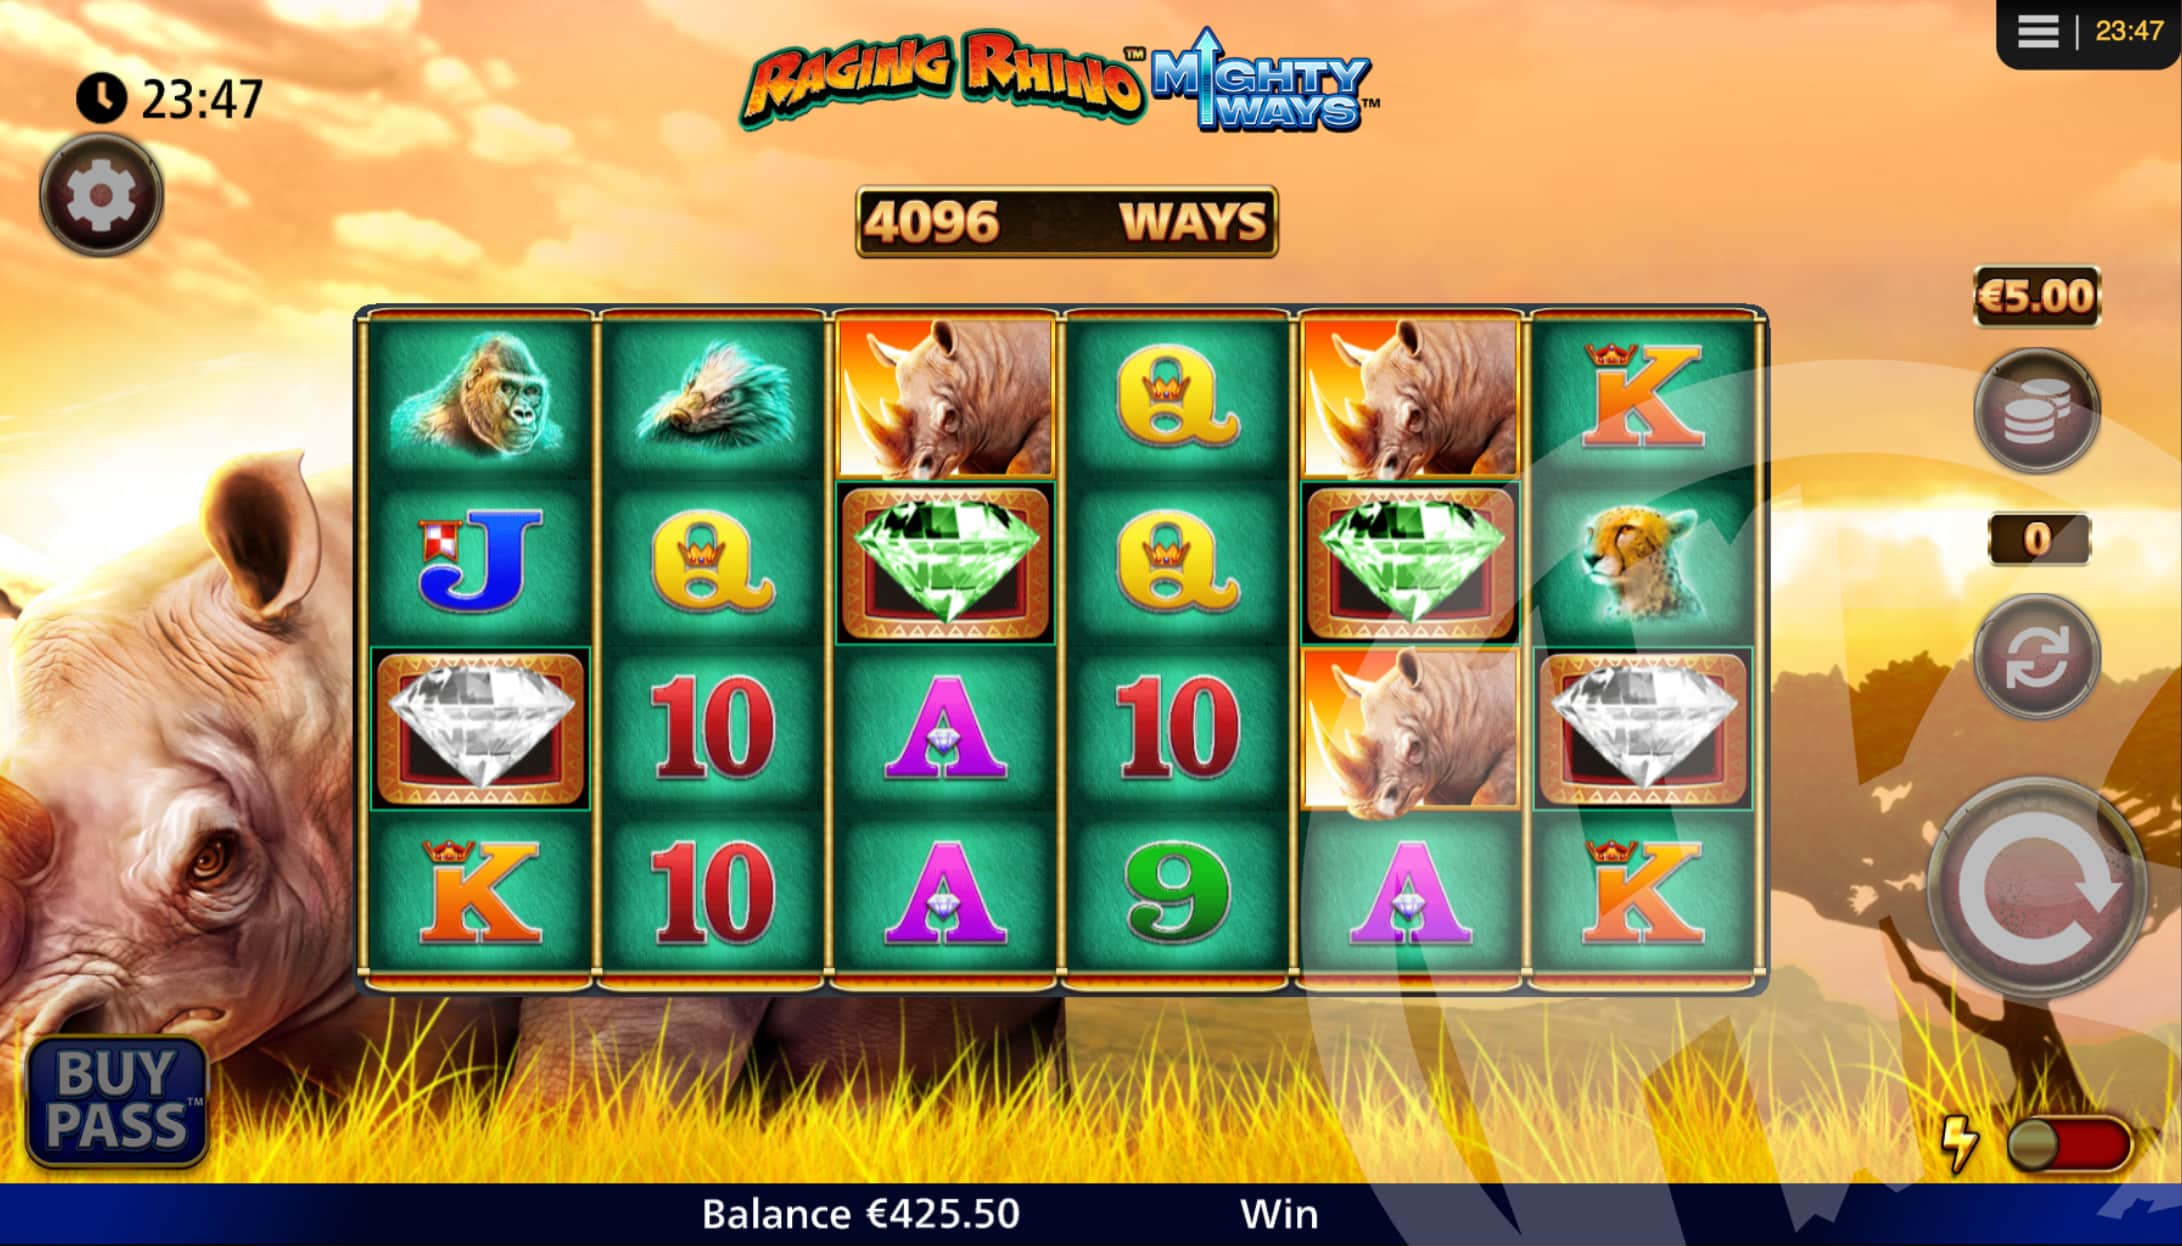 Land 3 or More Scatters or Bonus Scatters to Trigger Free Spins or Super Free Spins